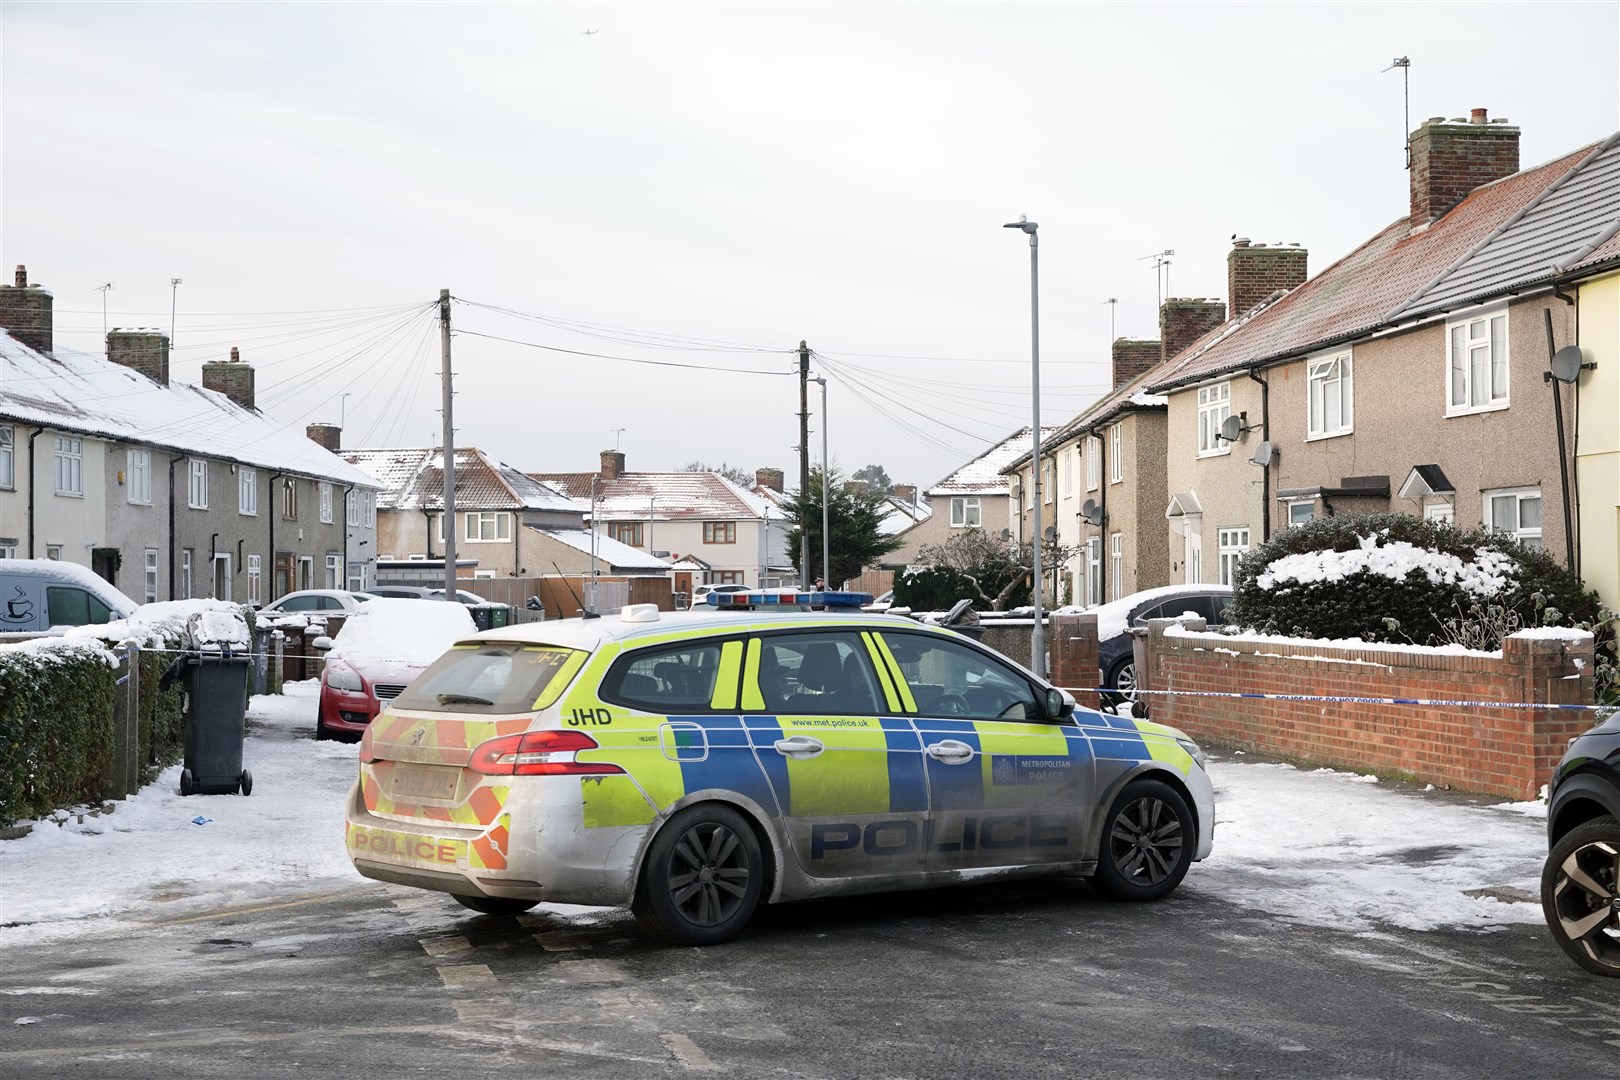 The children’s father forced entry to their home in Cornwallis Road and found the boys dead (Yui Mok/PA)